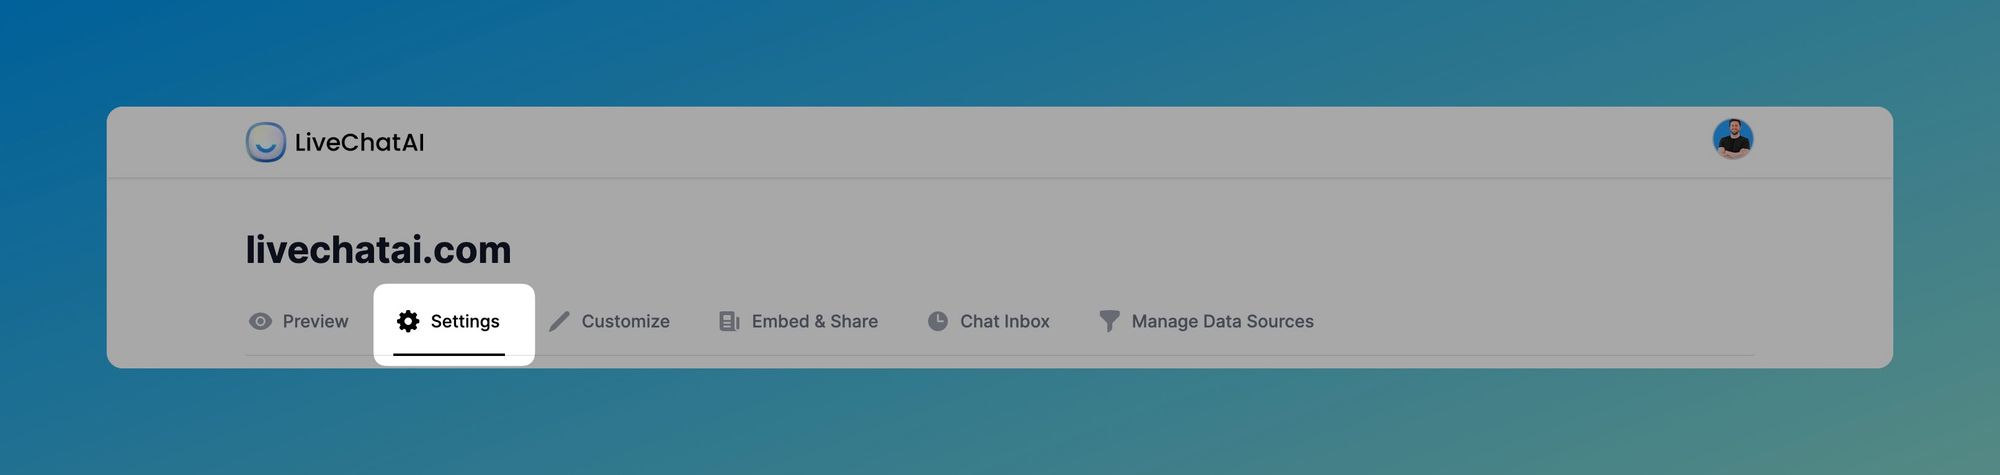 the Settings section of LiveChatAI dashboard